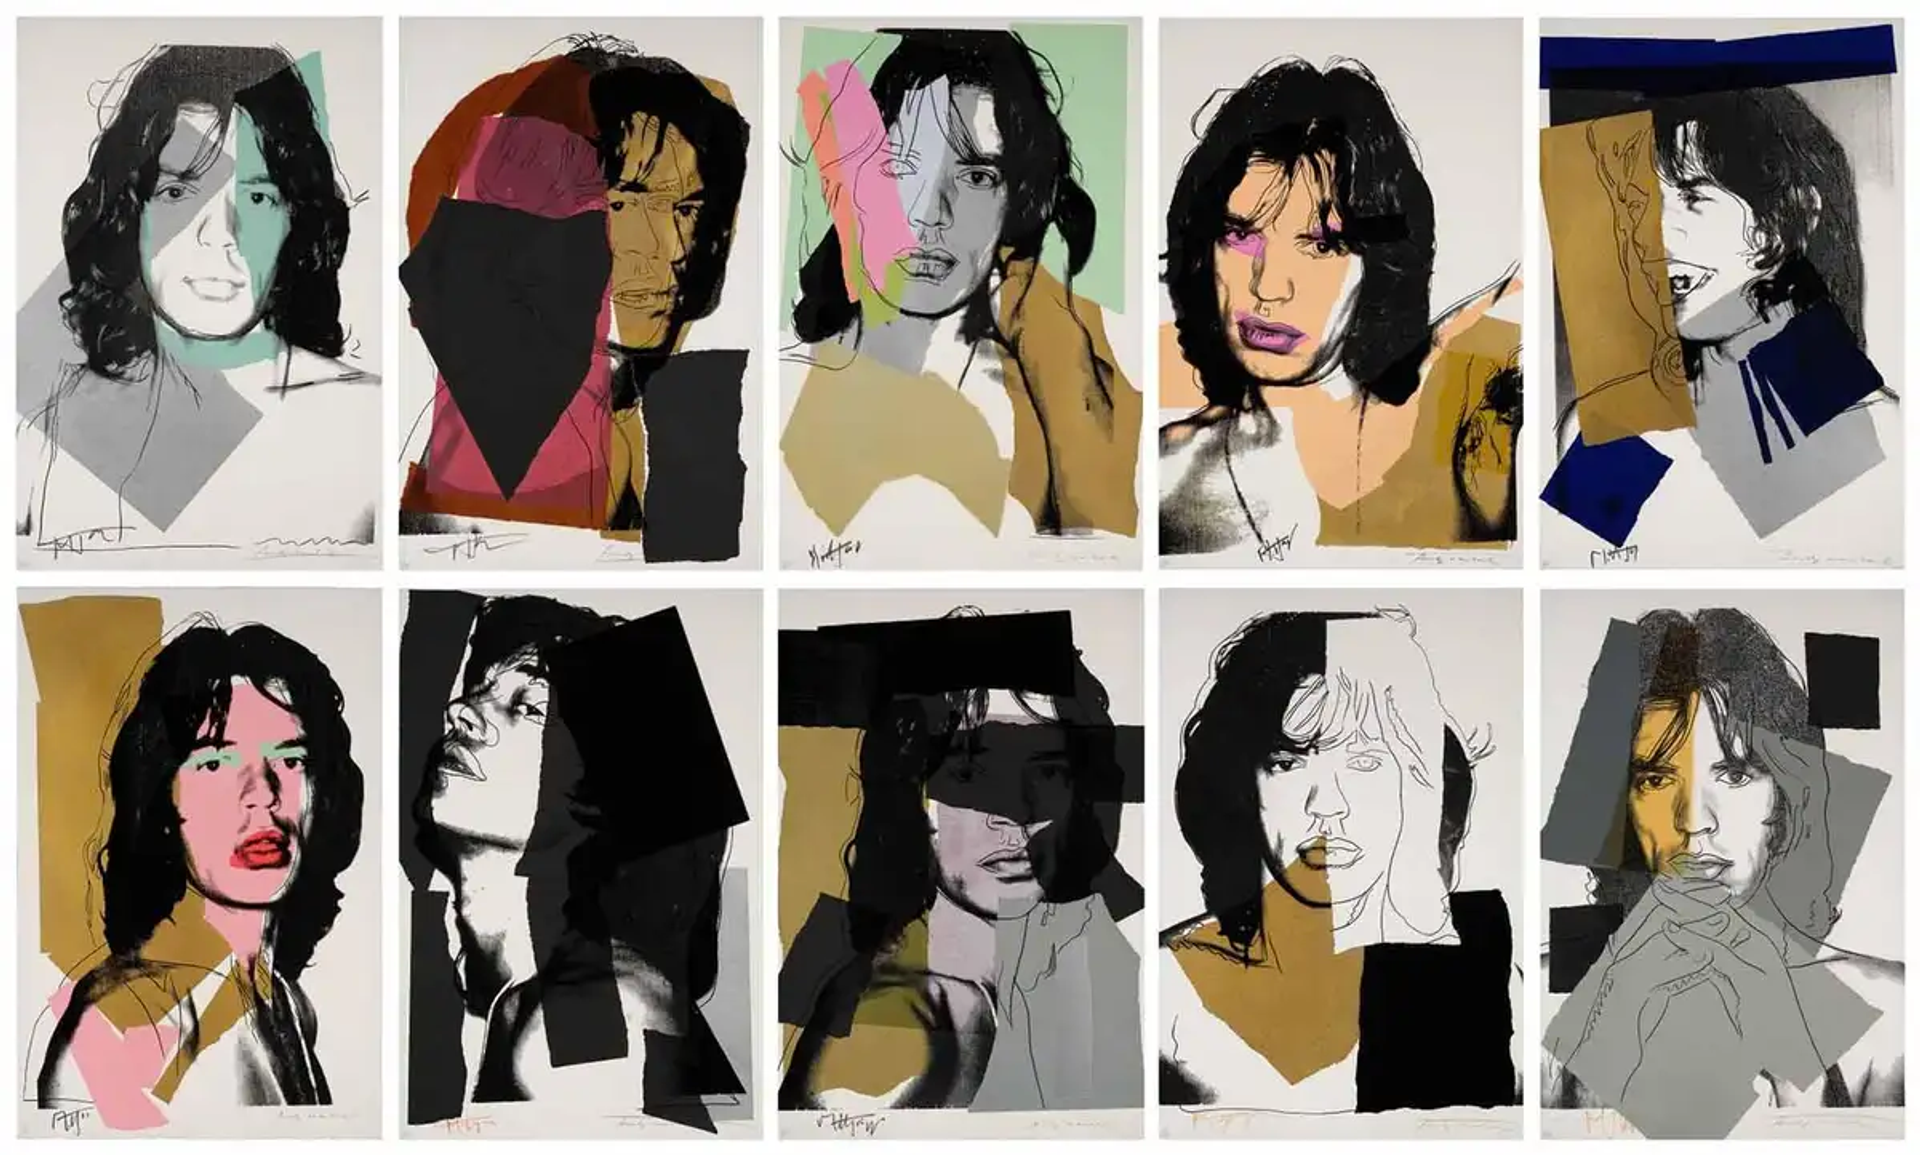 An image of the complete set of Warhol's Mick Jagger series, featuring 10 portraits of the singer printed on Arches Aquarelle paper with added outlining and colour blocking.